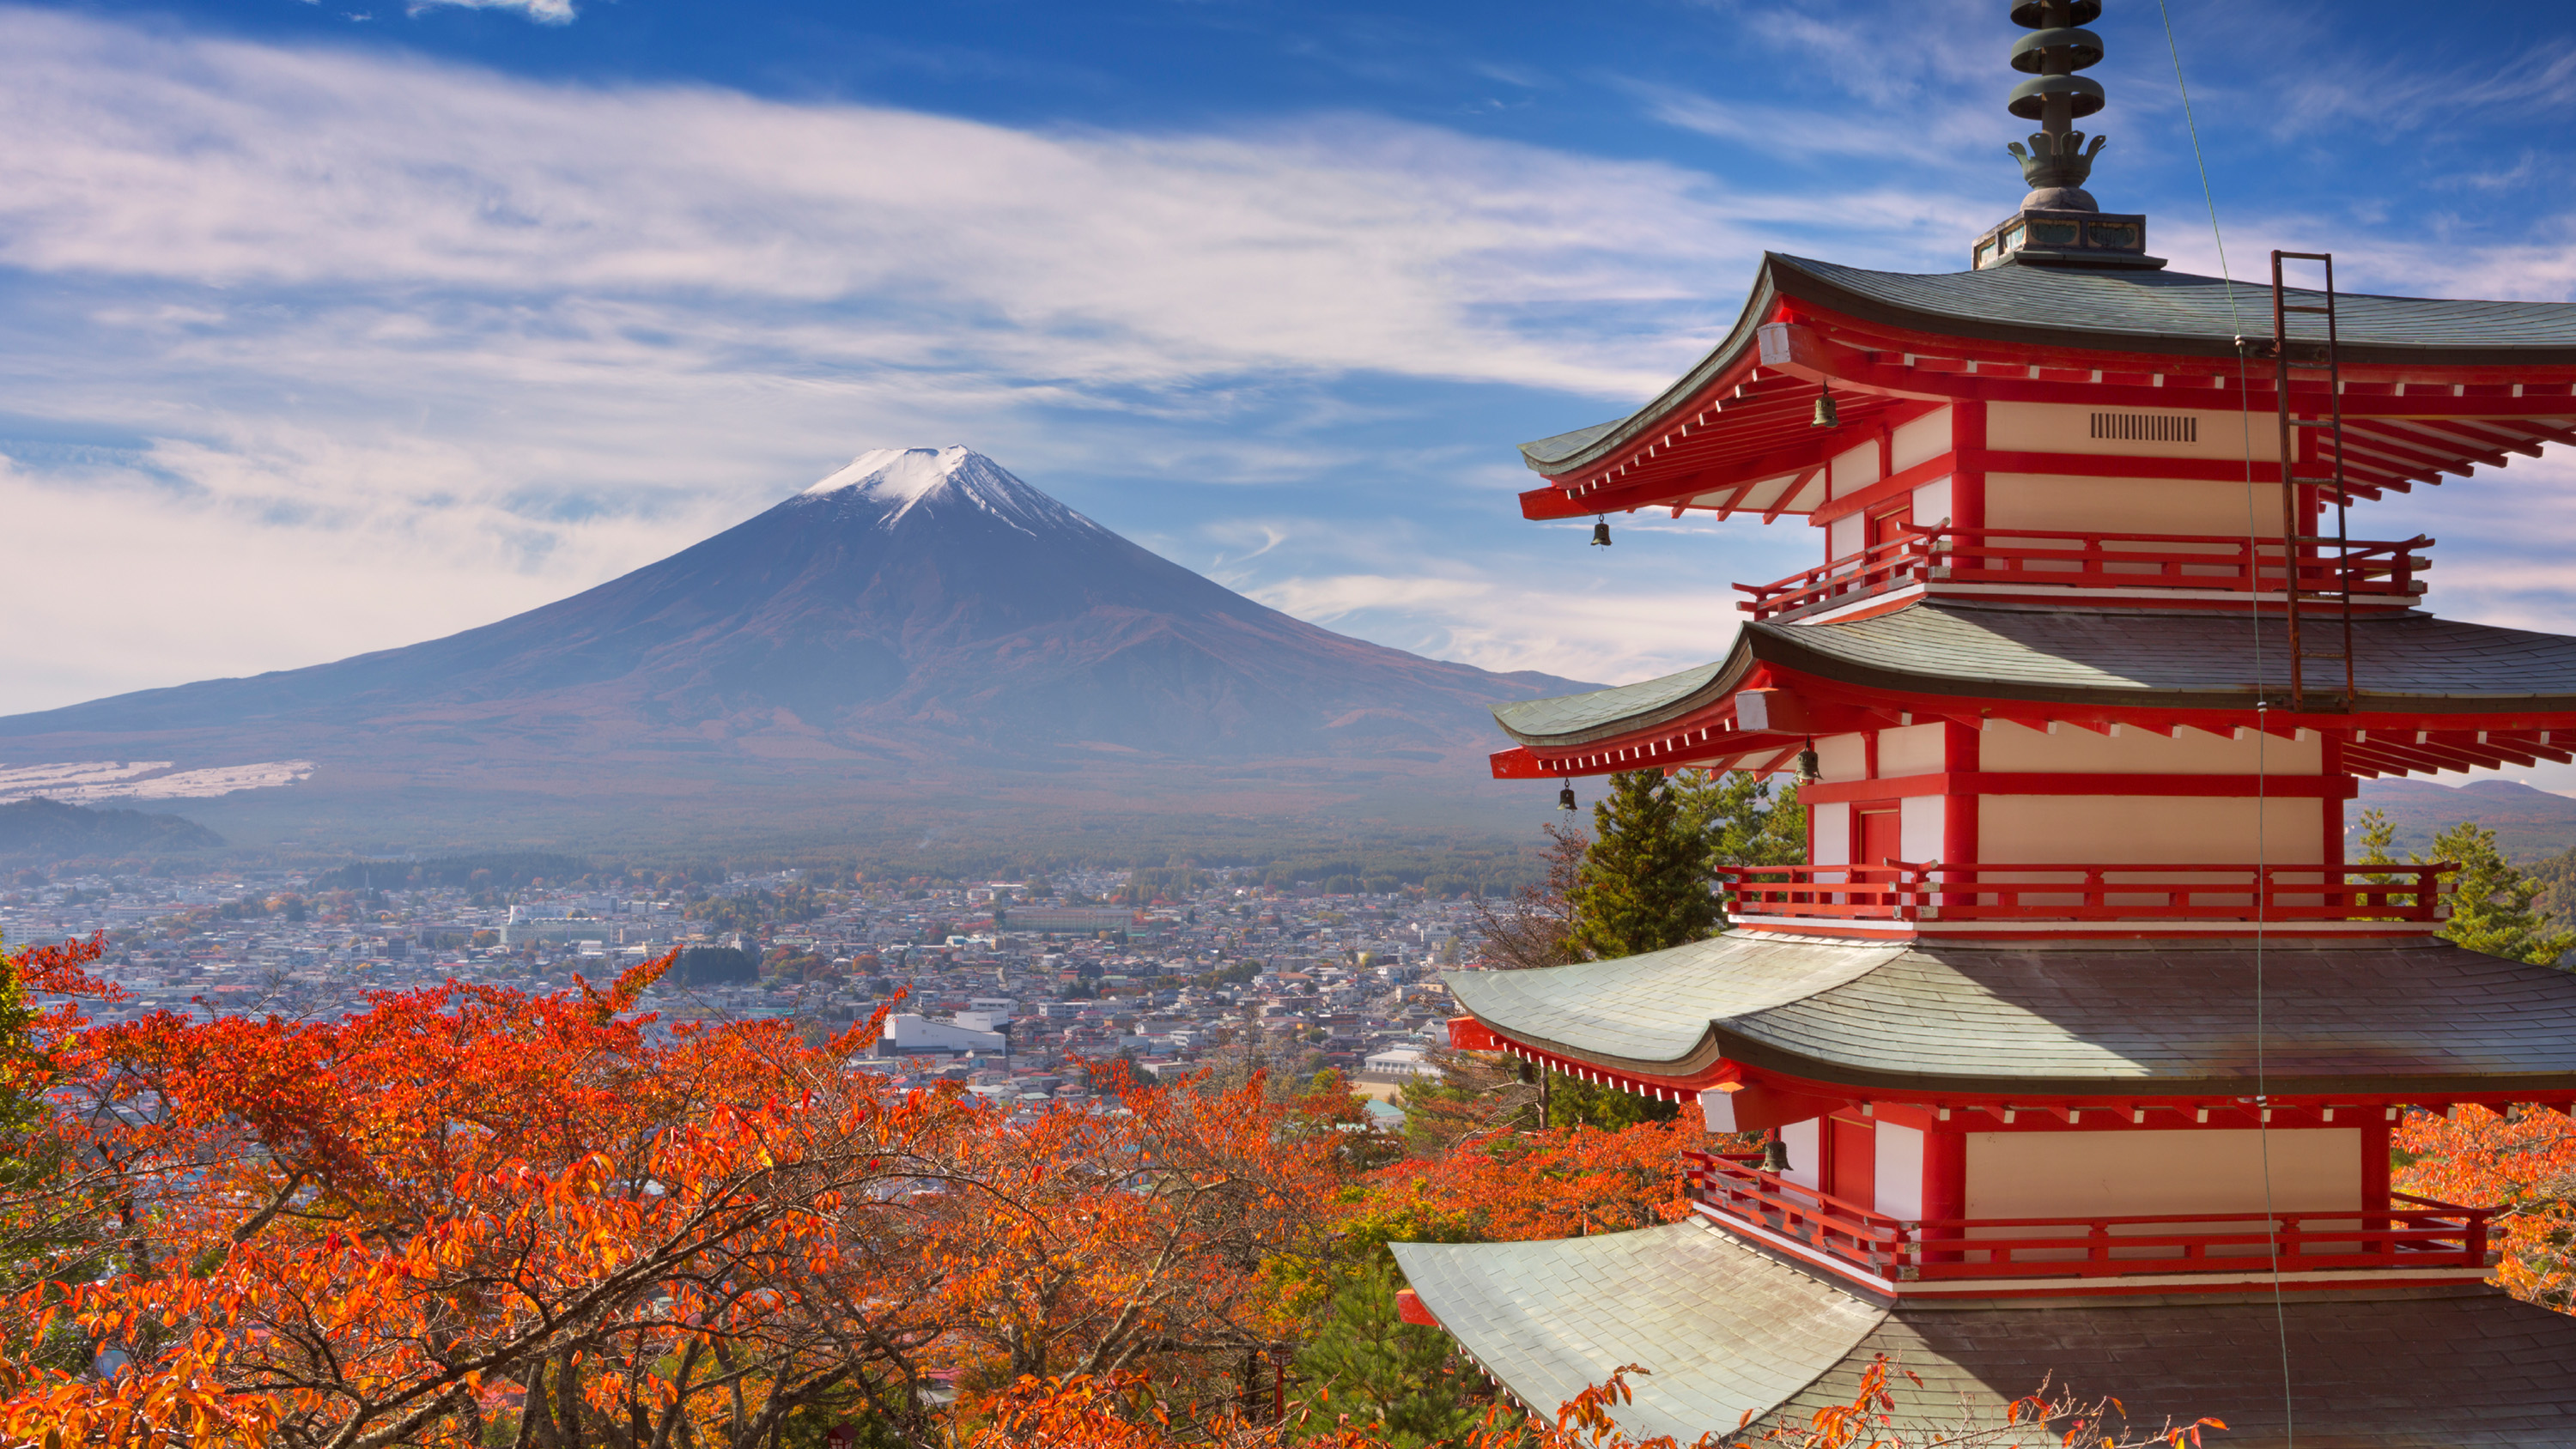 General 3000x1688 Japan architecture pagoda red leaves fall volcano Mount Fuji Kyoto